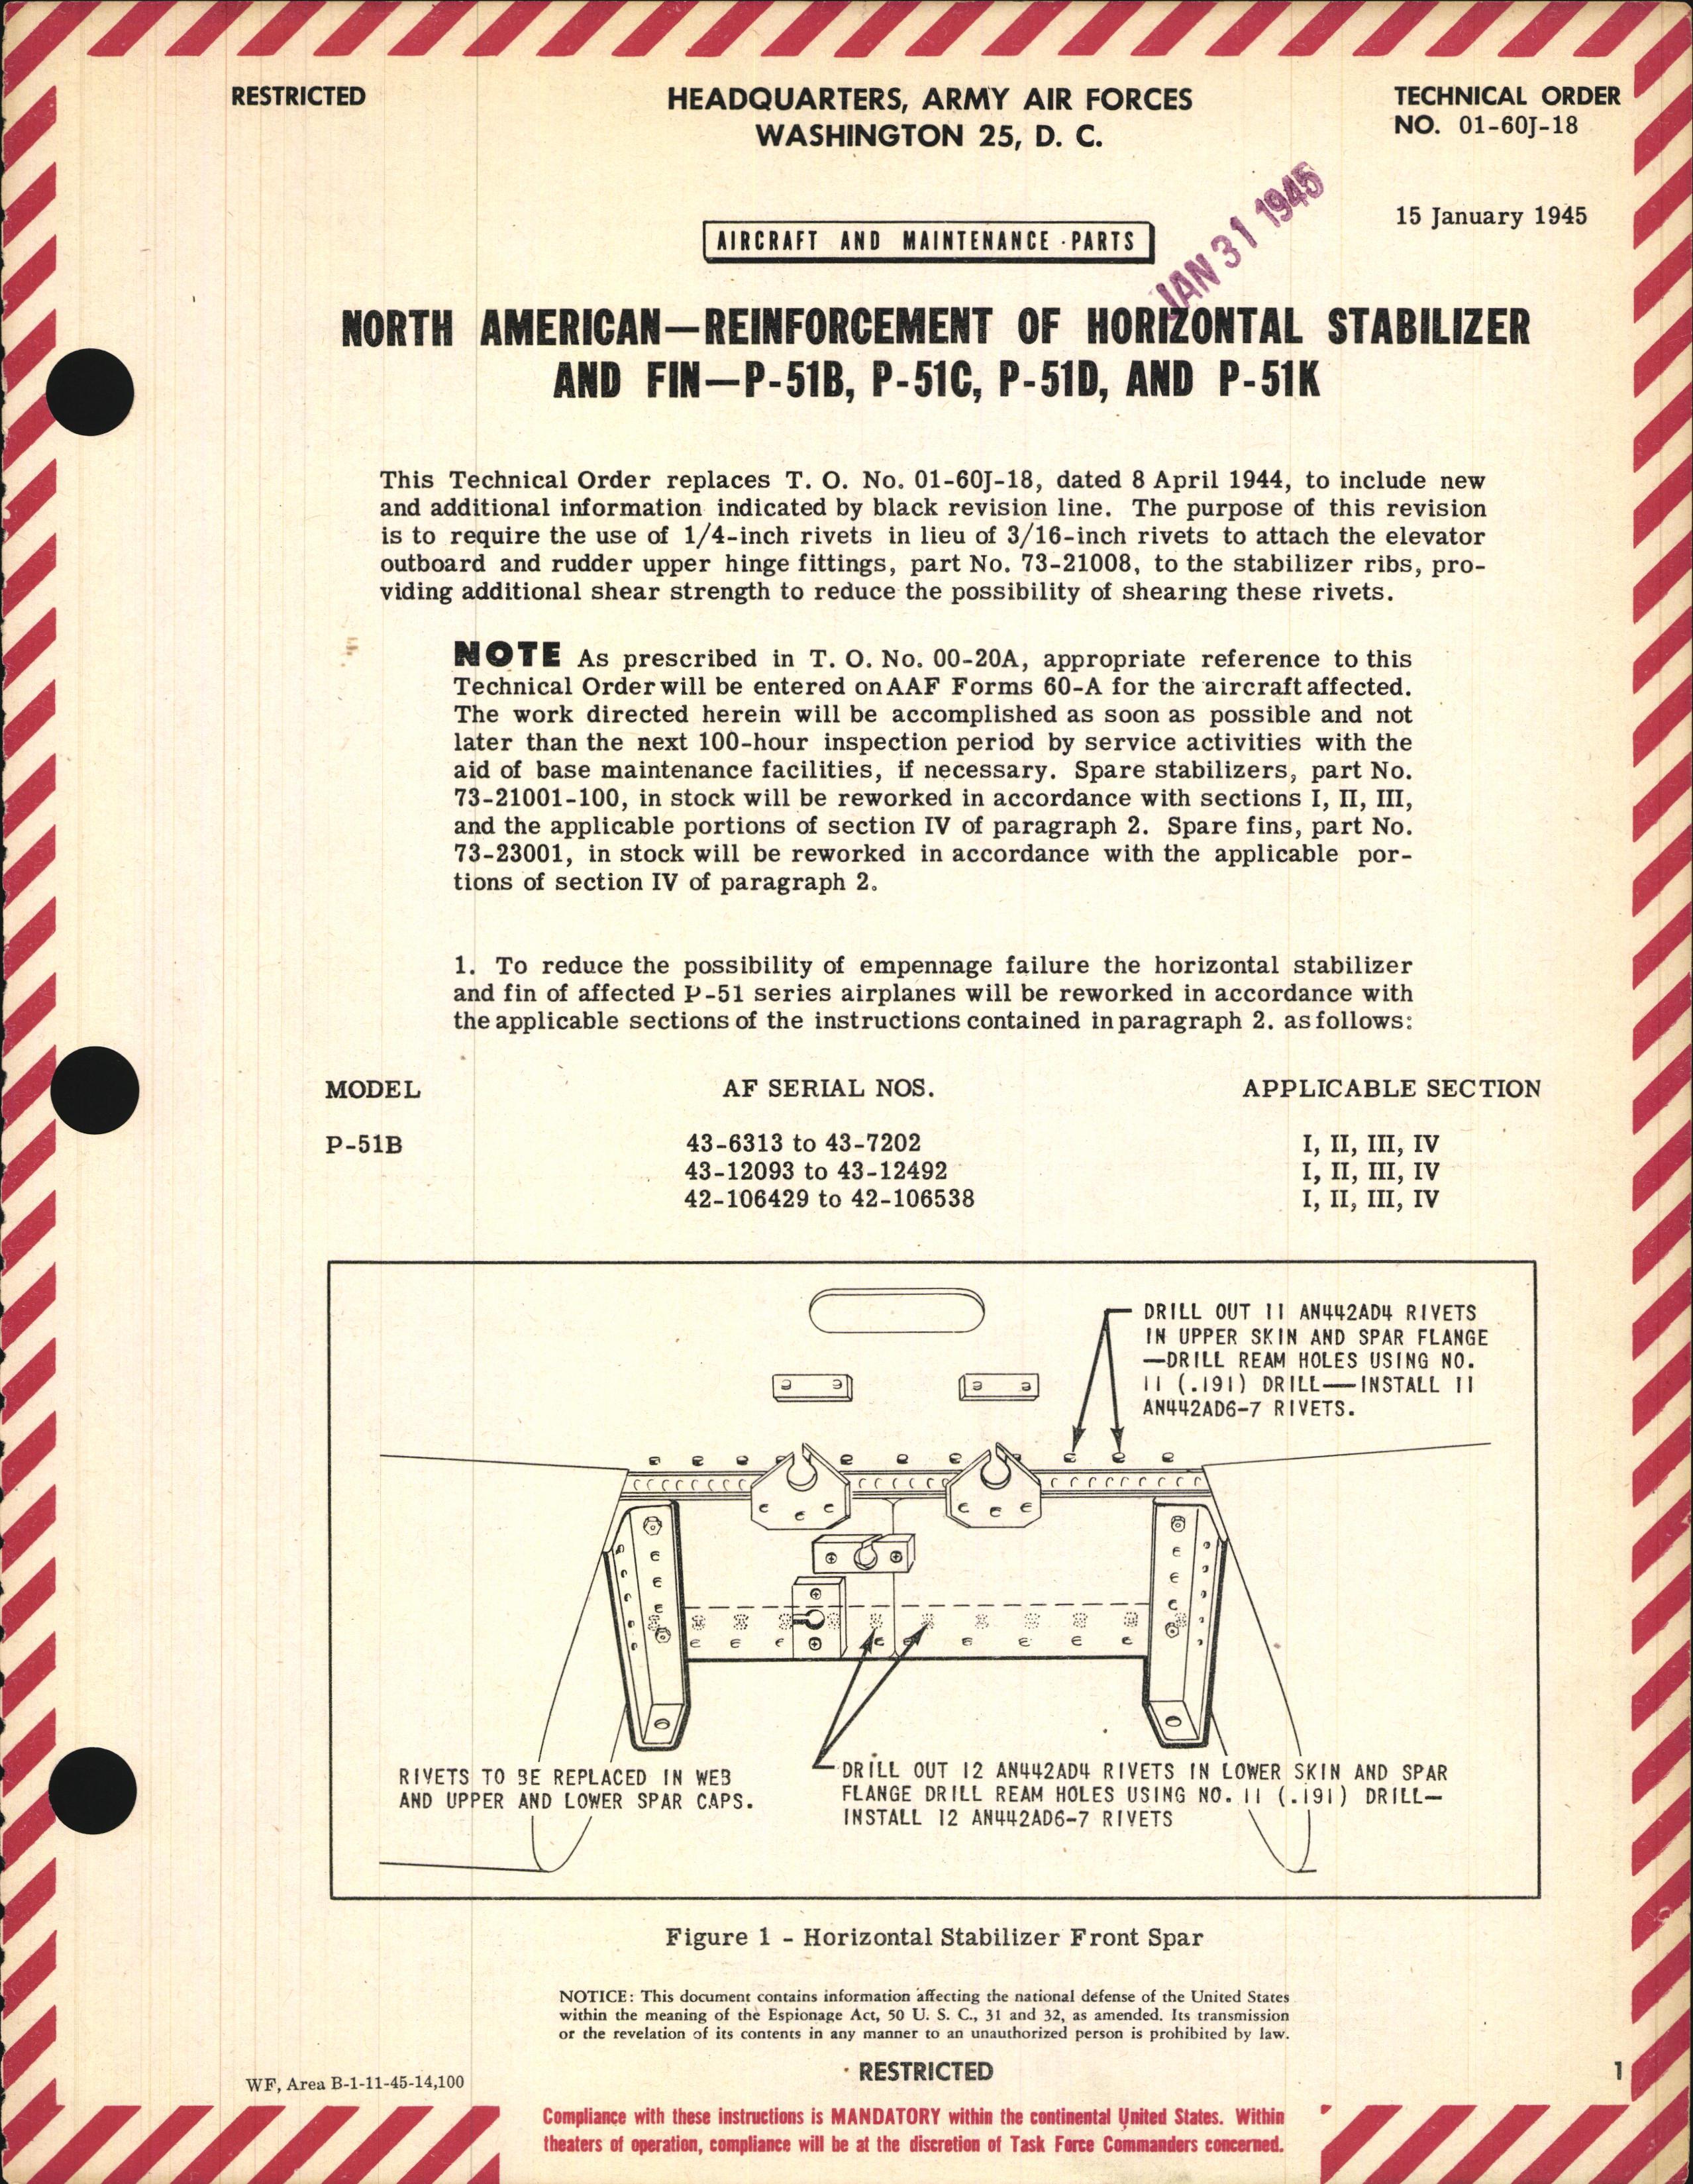 Sample page 1 from AirCorps Library document: Reinforcement of Horizontal Stabilizer and Fin for P-51B, C, D, and K